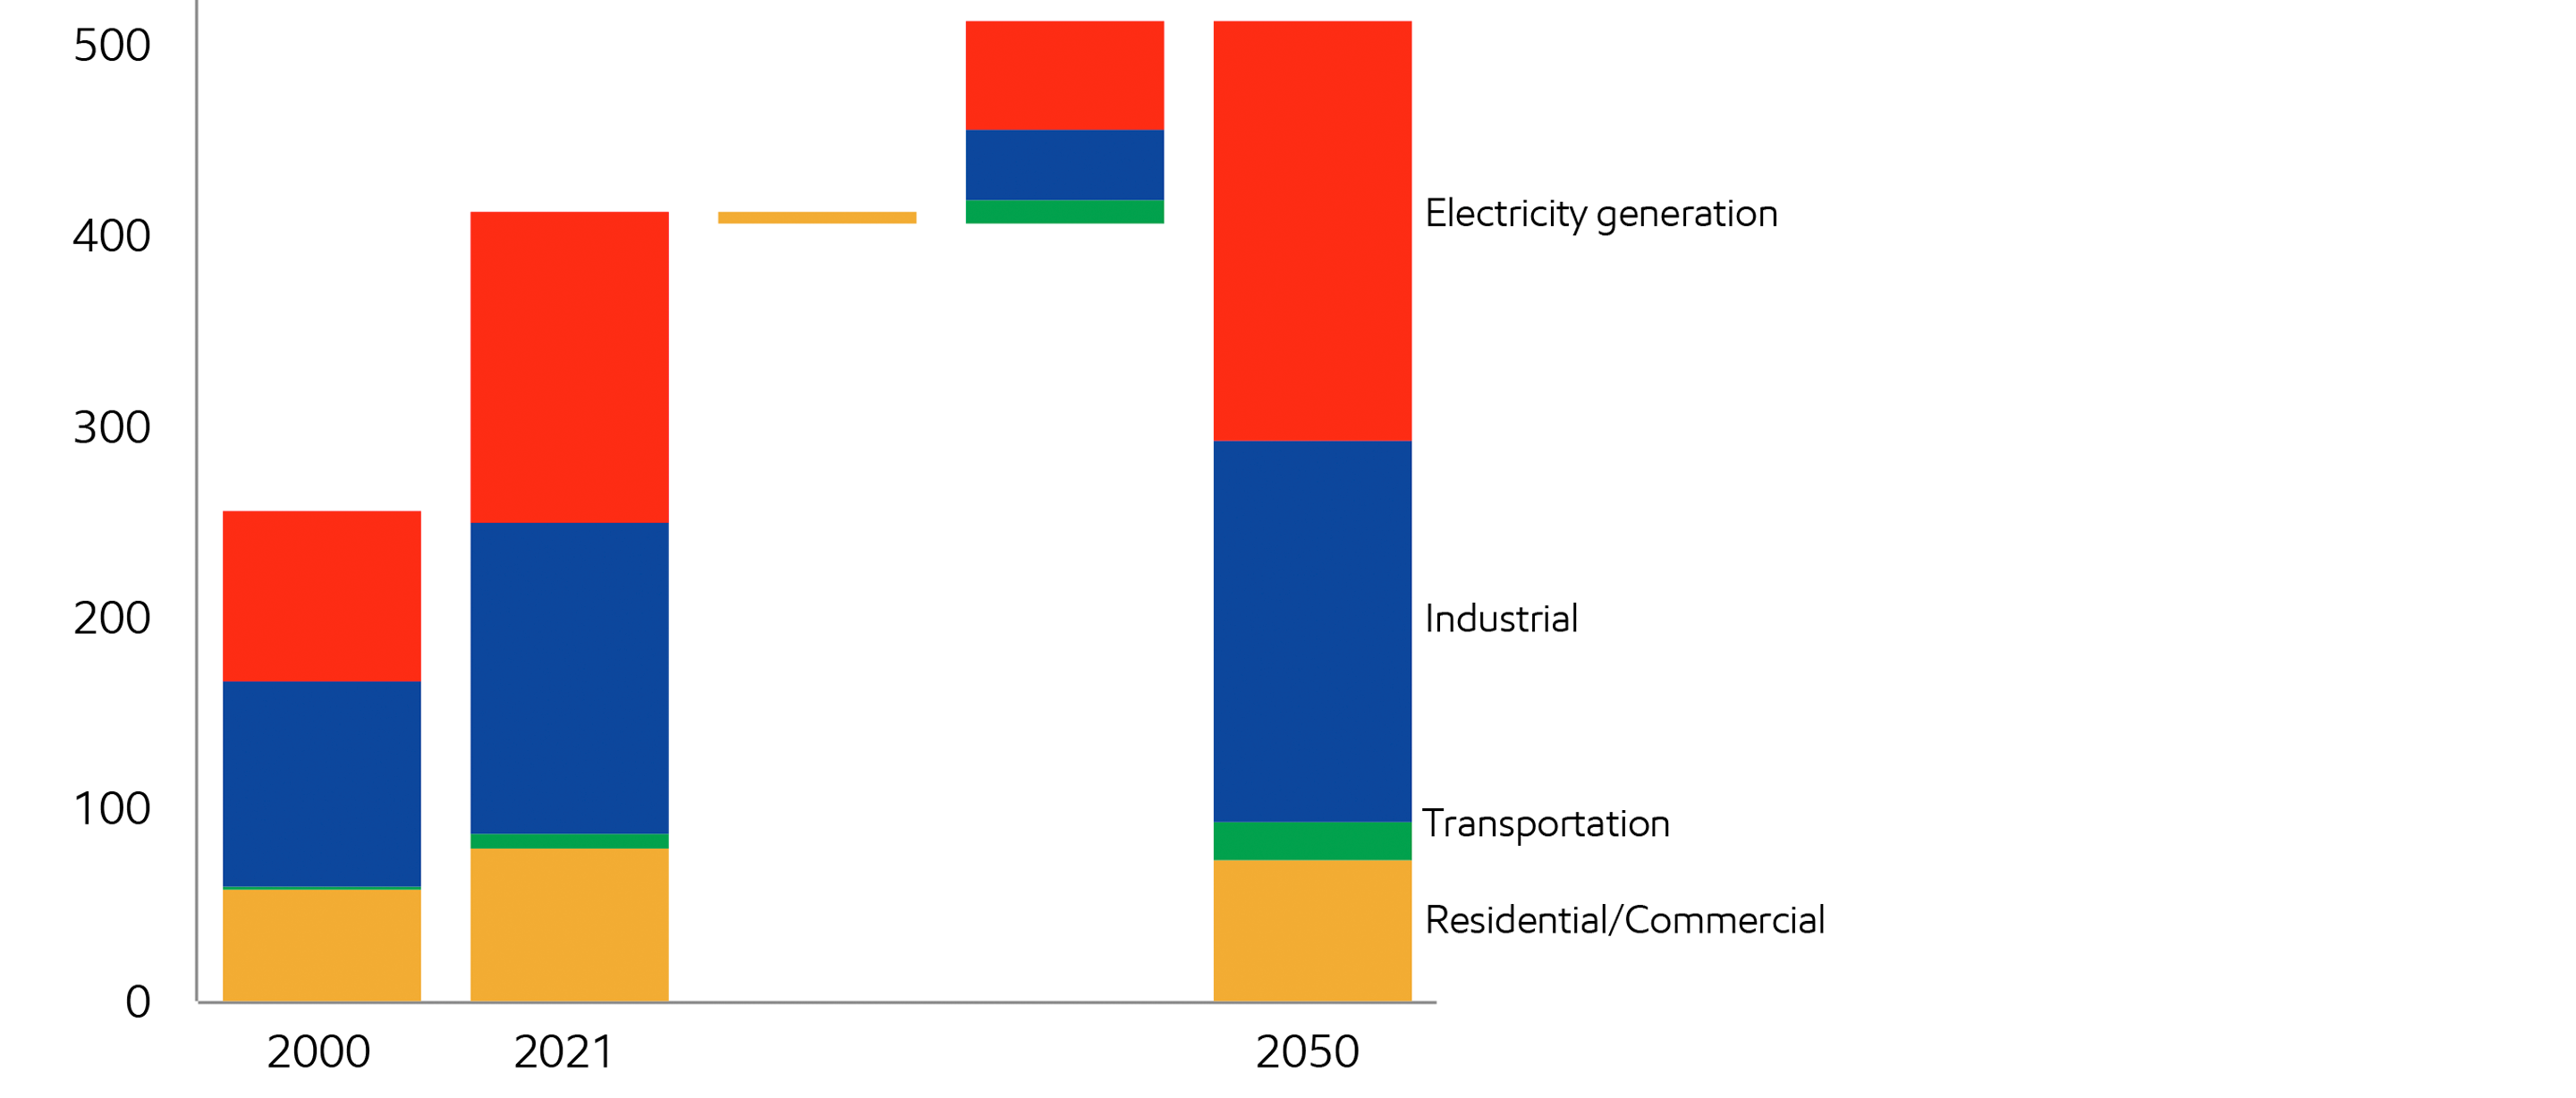 Image Natural gas grows in industry, electricity generation, and transportation